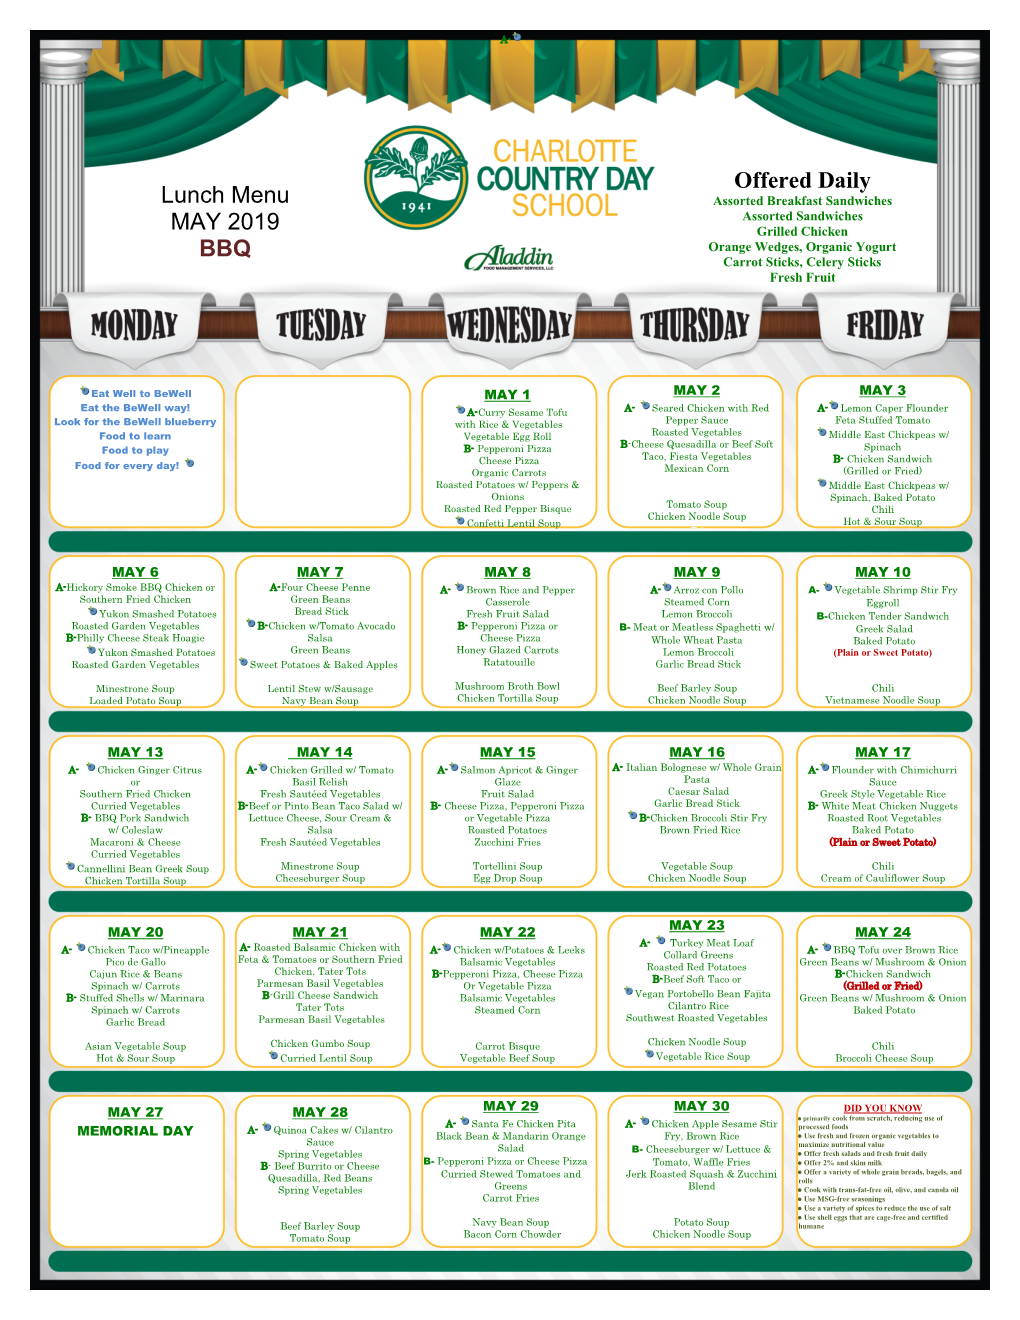 Lunch Menu MAY 2019 BBQ Offered Daily